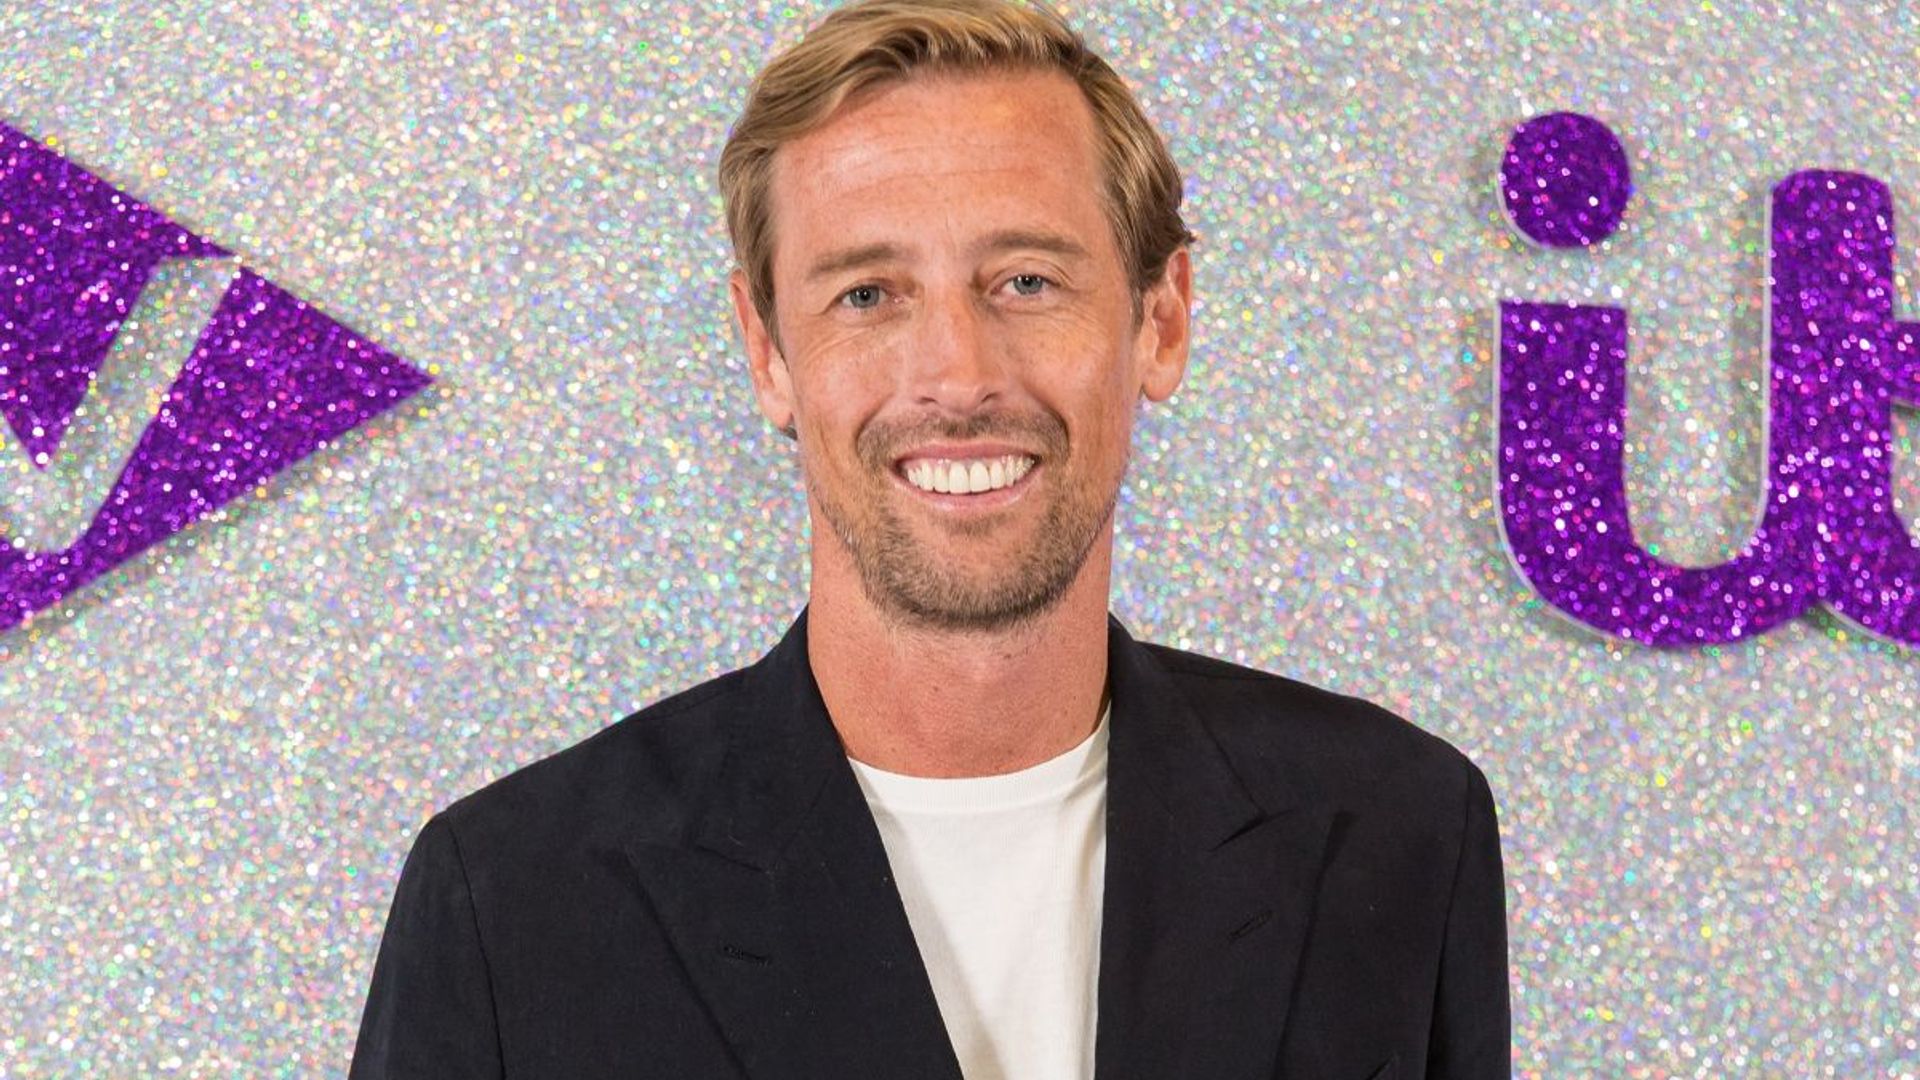 Peter Crouch opens up about mental health, lad culture and why it's time to speak up